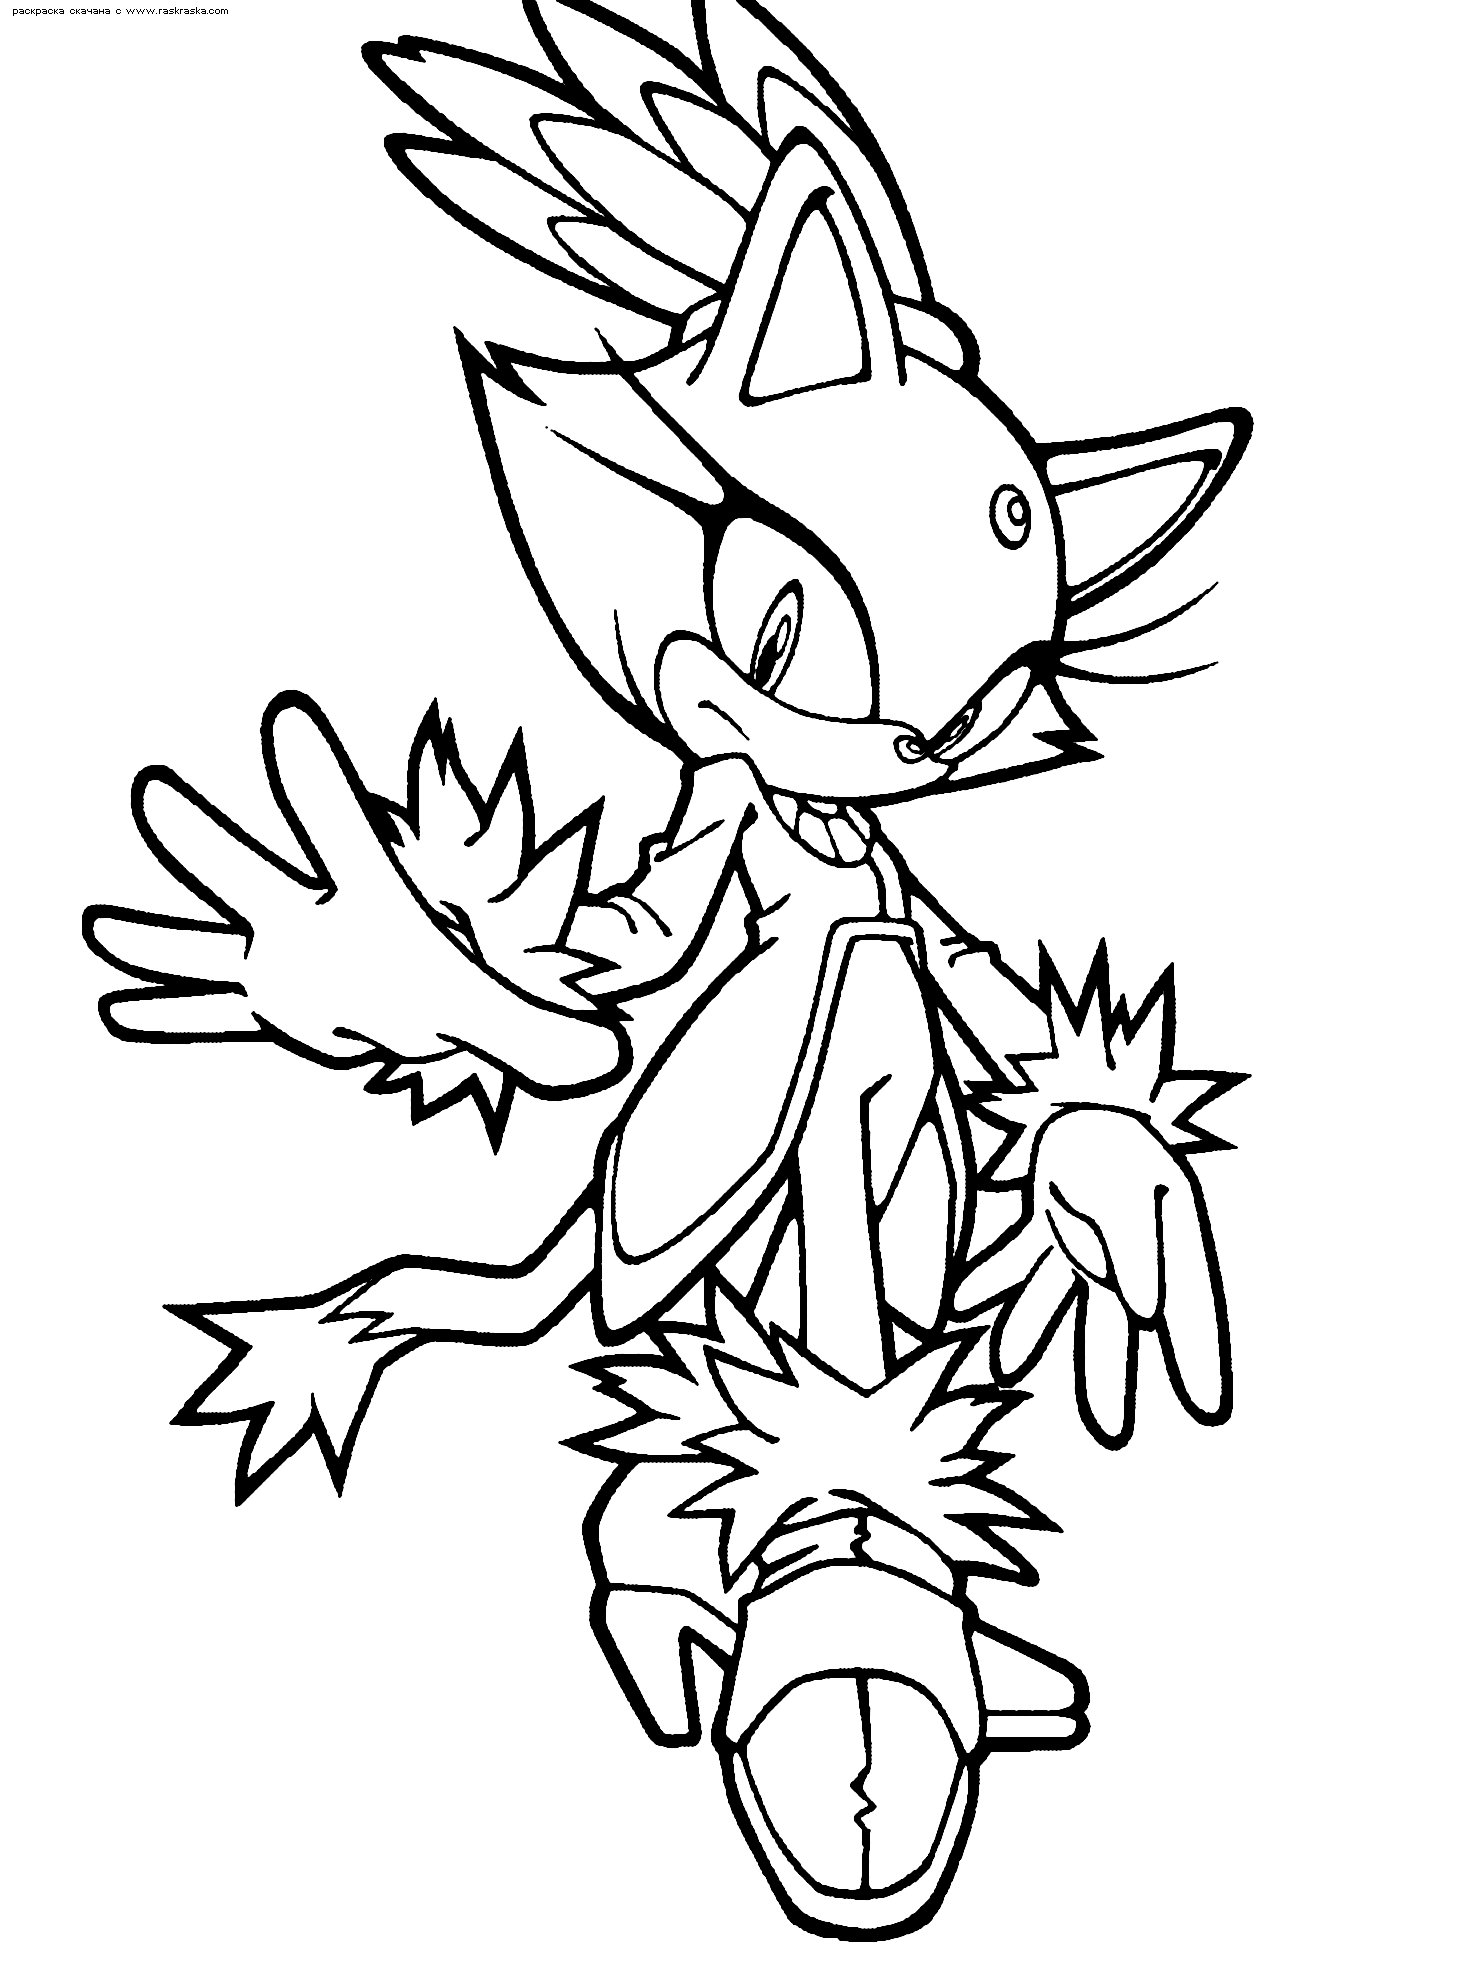 Download Sonic Coloring Pages (4) - Coloring Kids